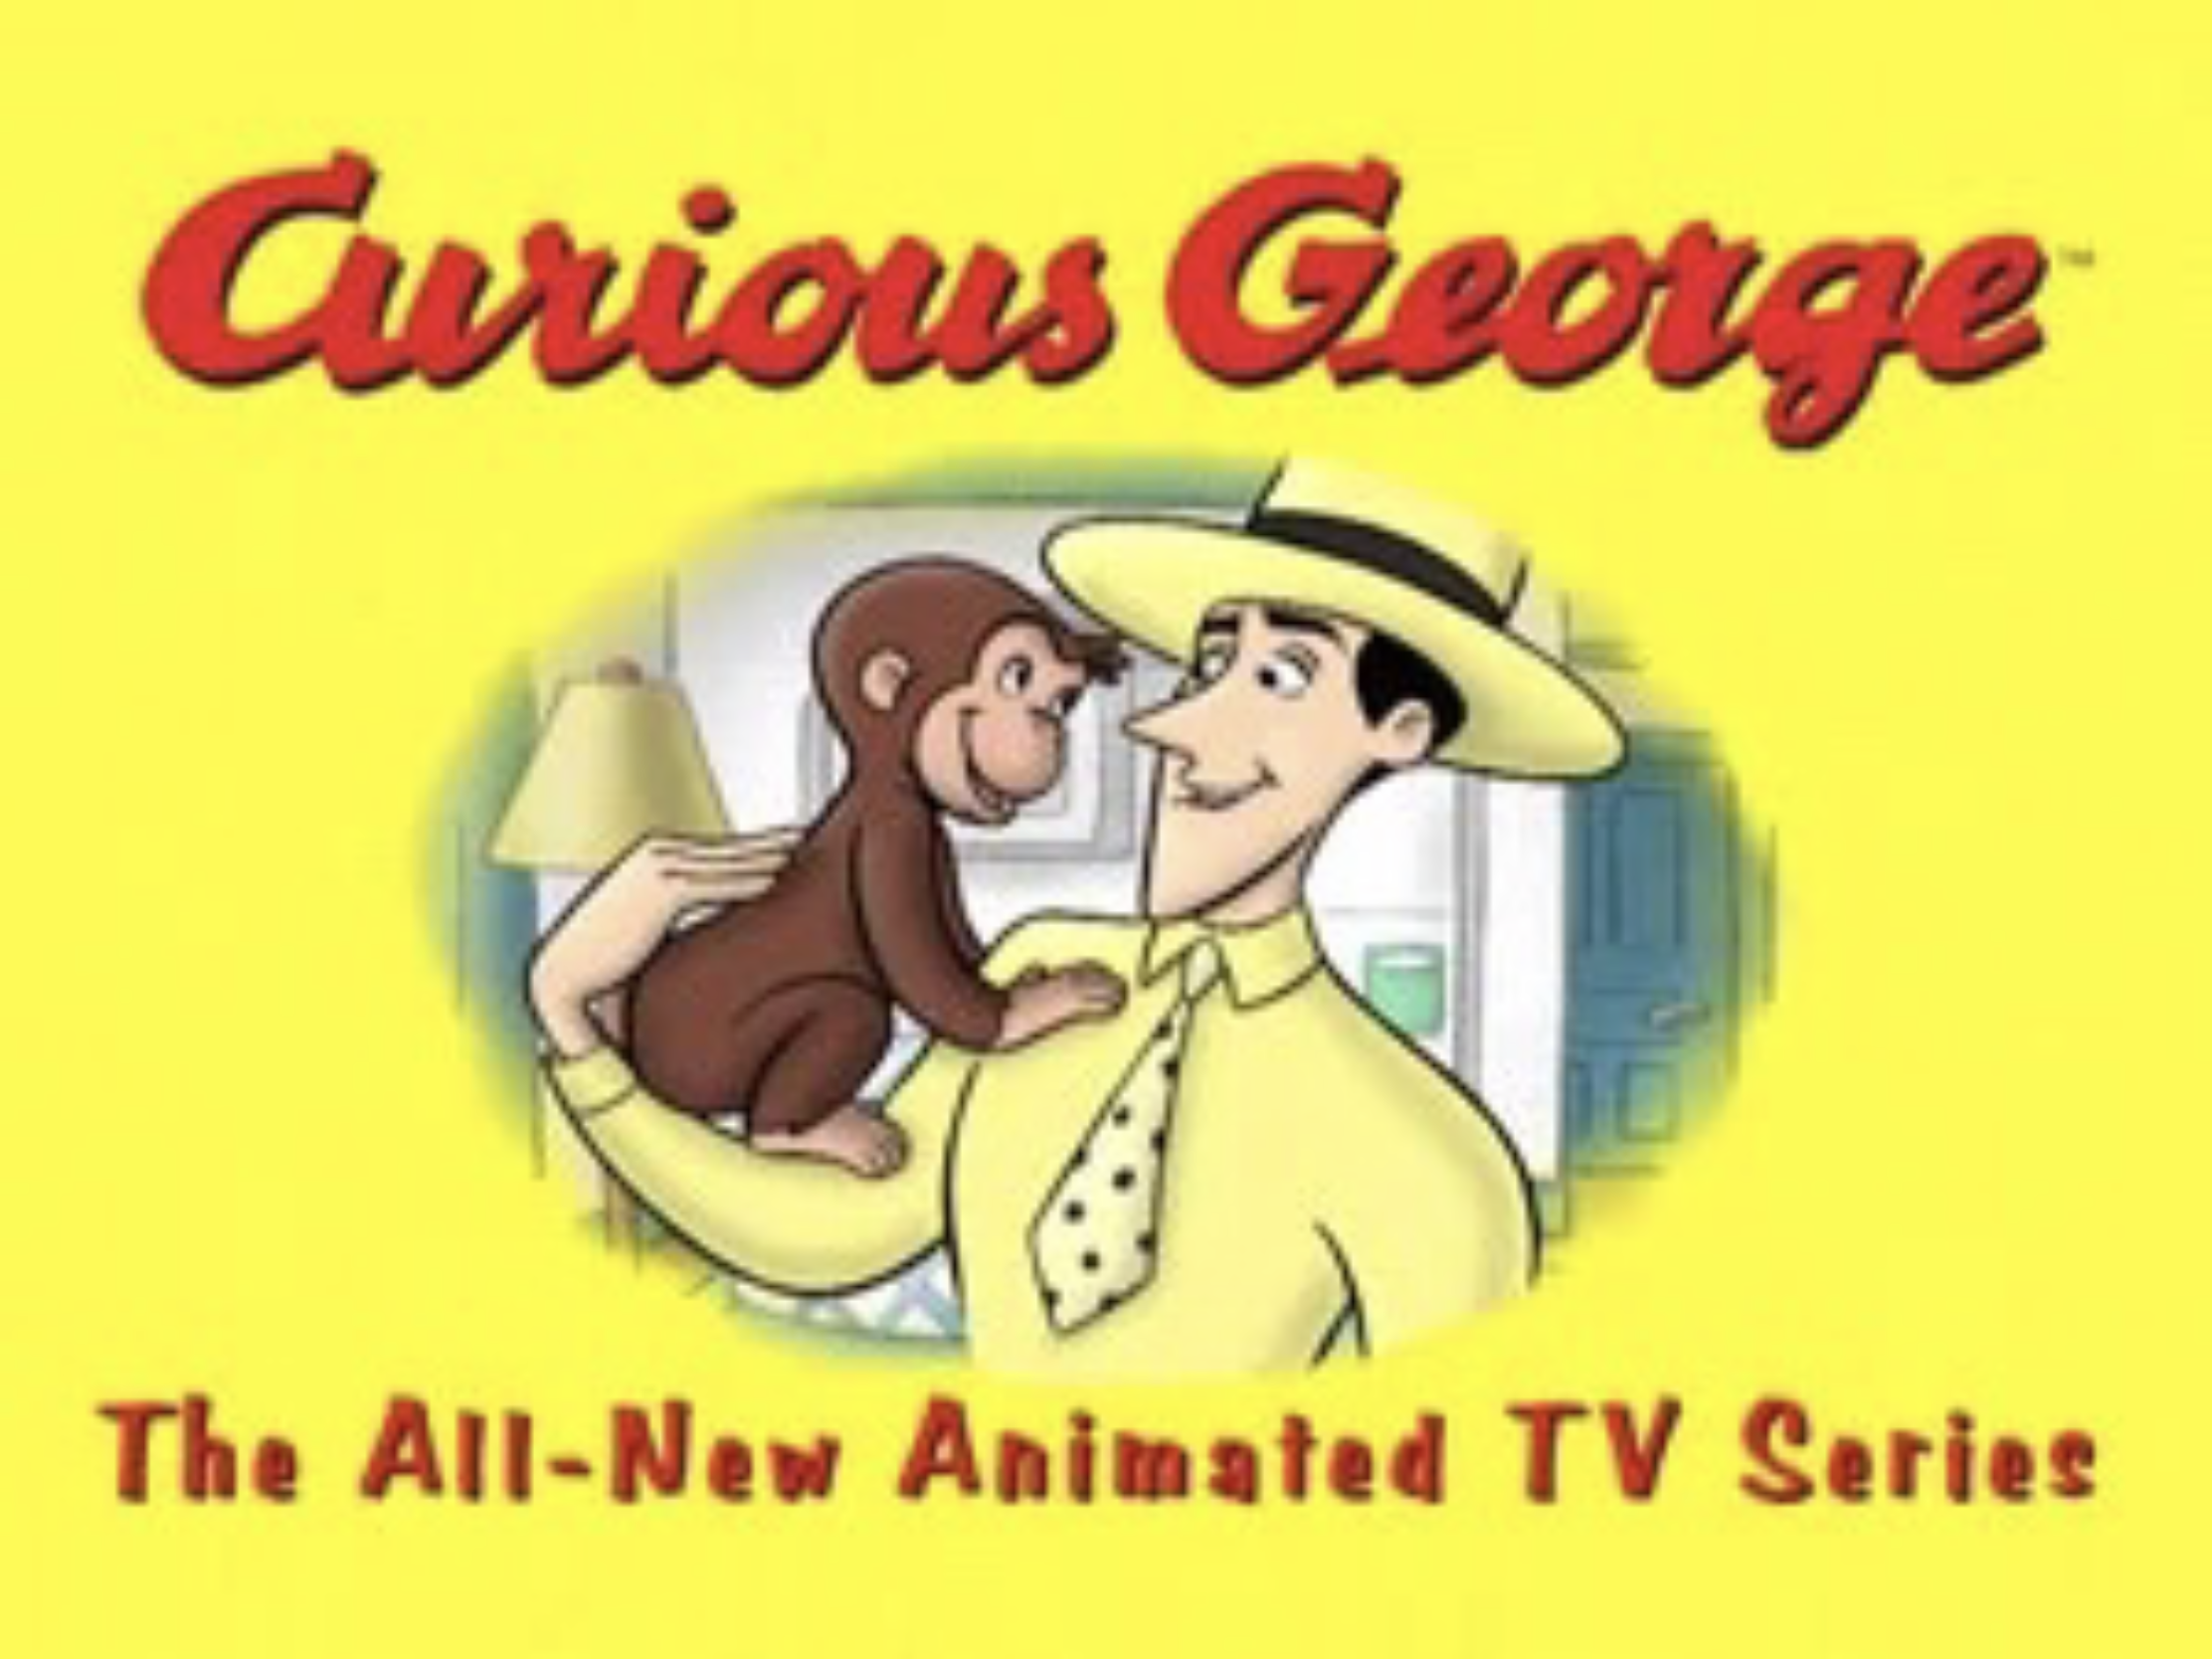 Curious george early tv logo.png